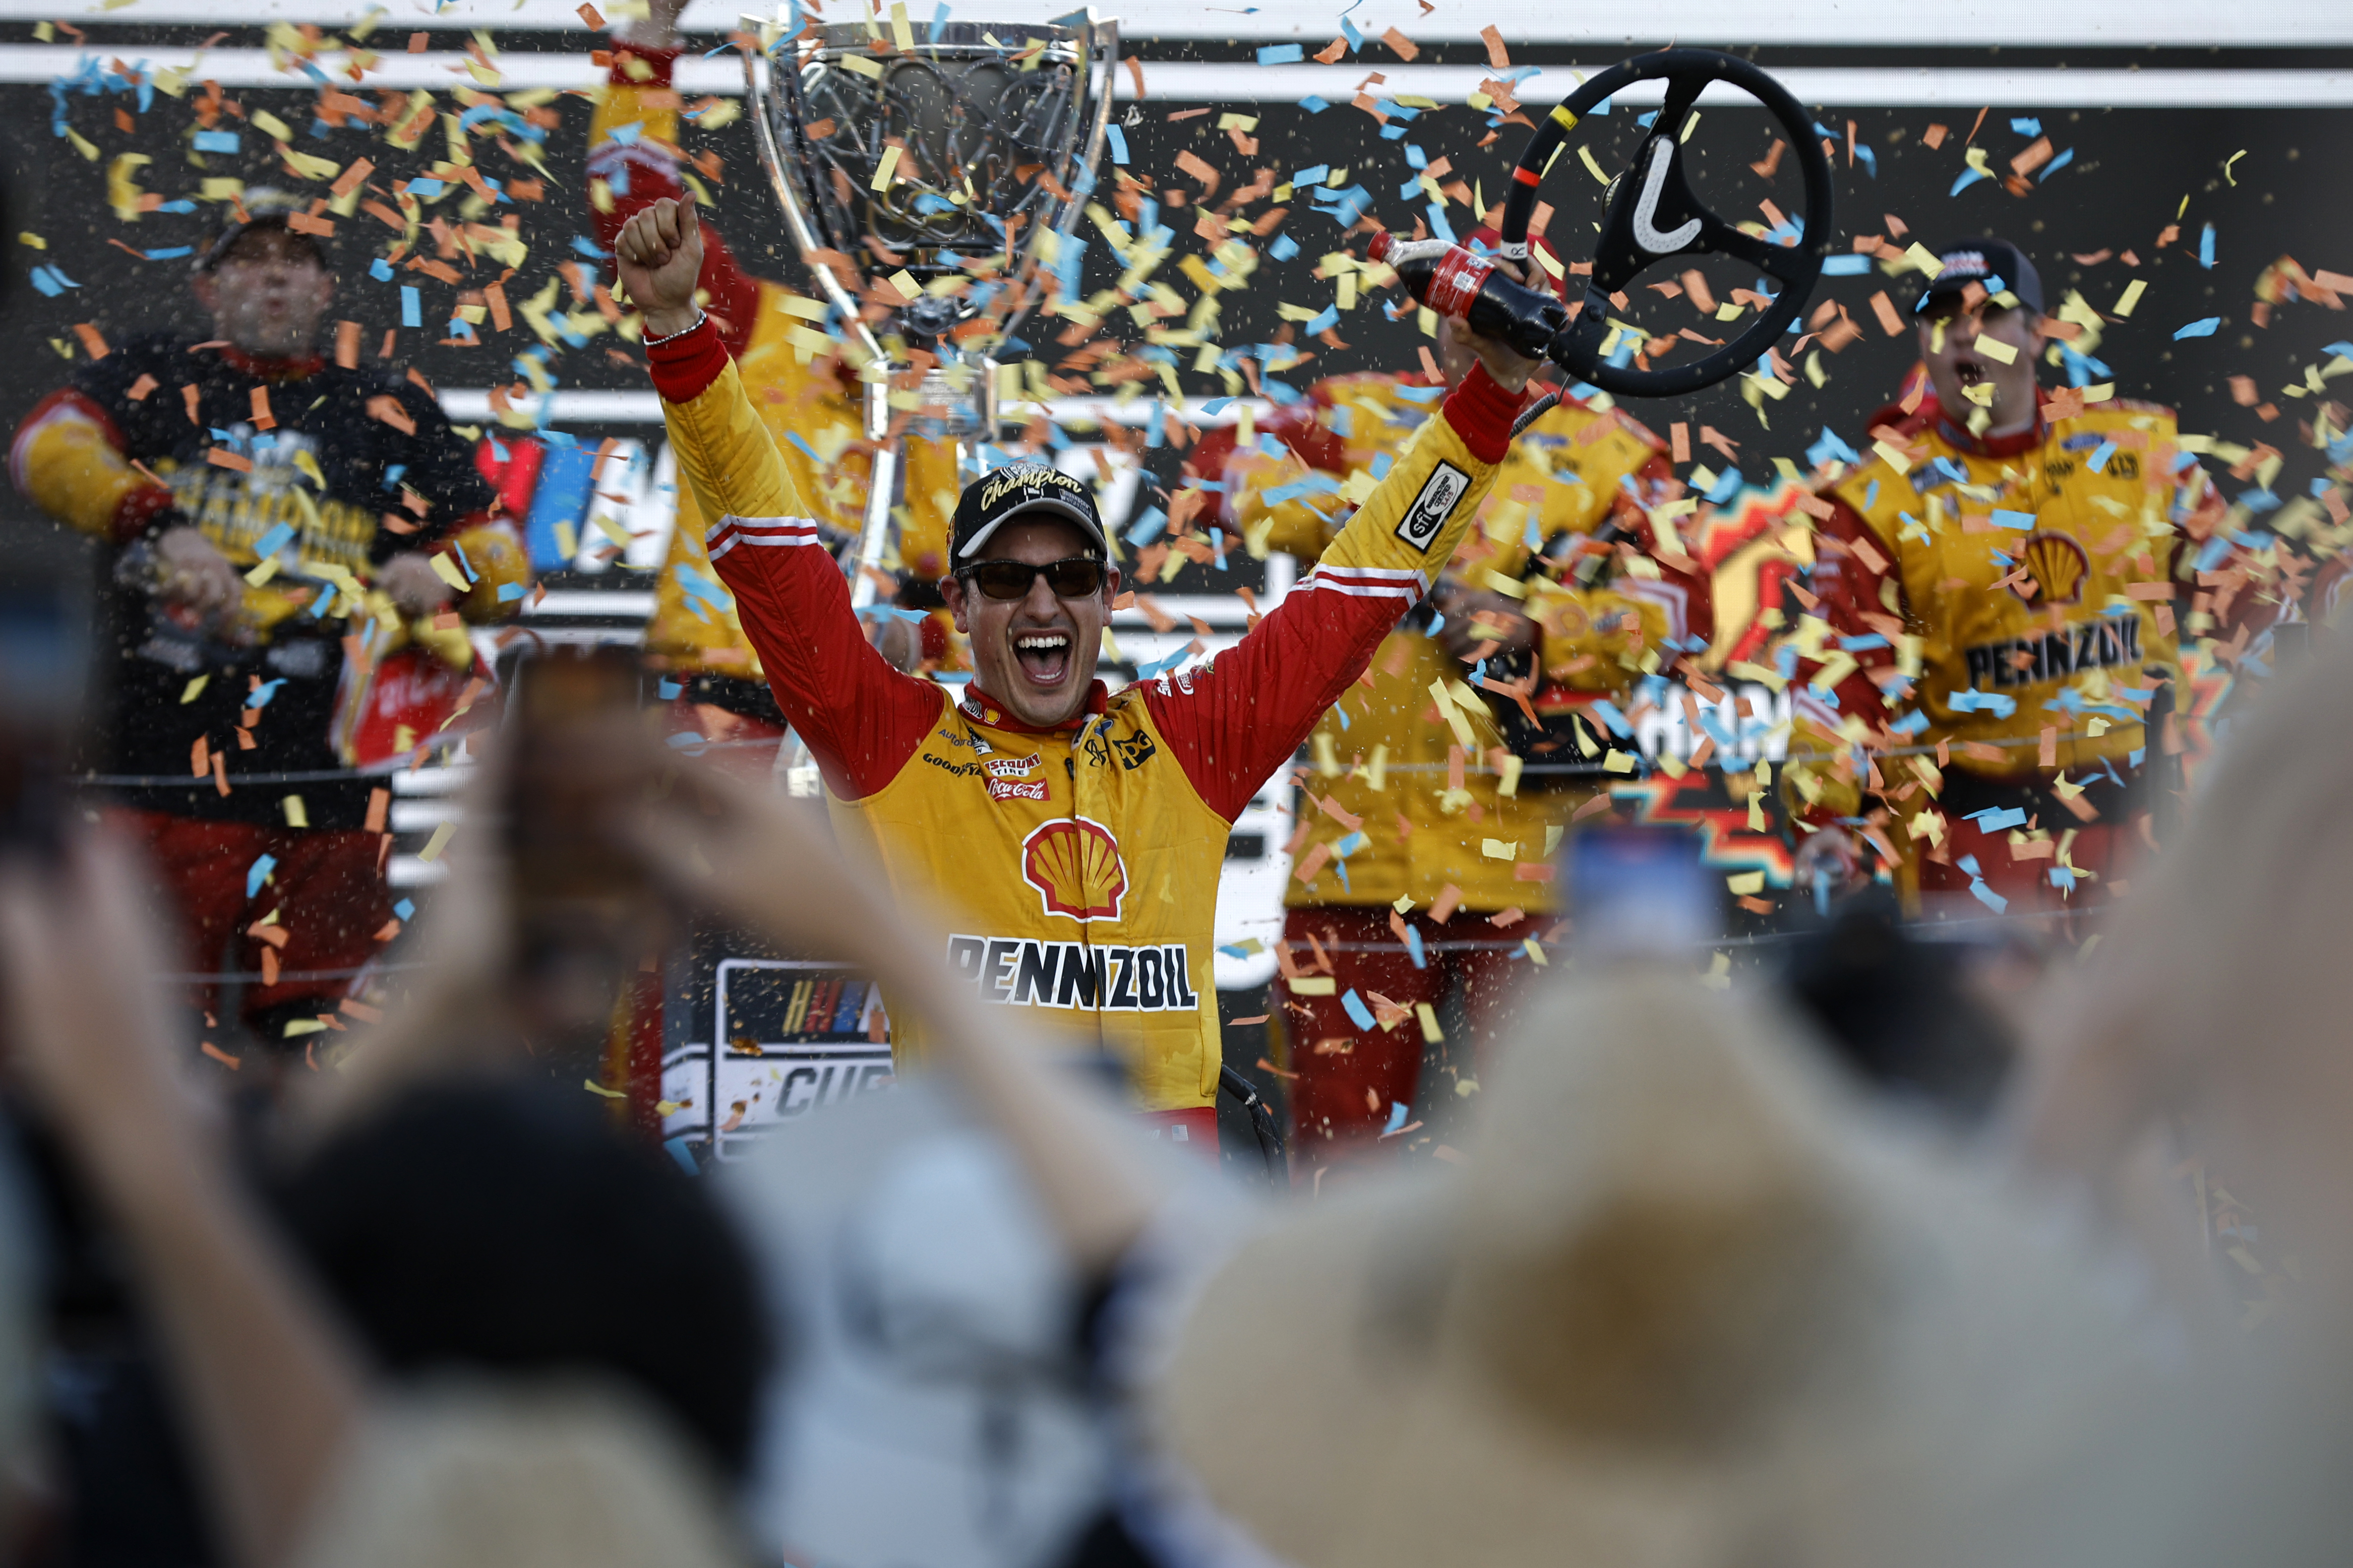 Joey Logano wins second NASCAR Cup Series title